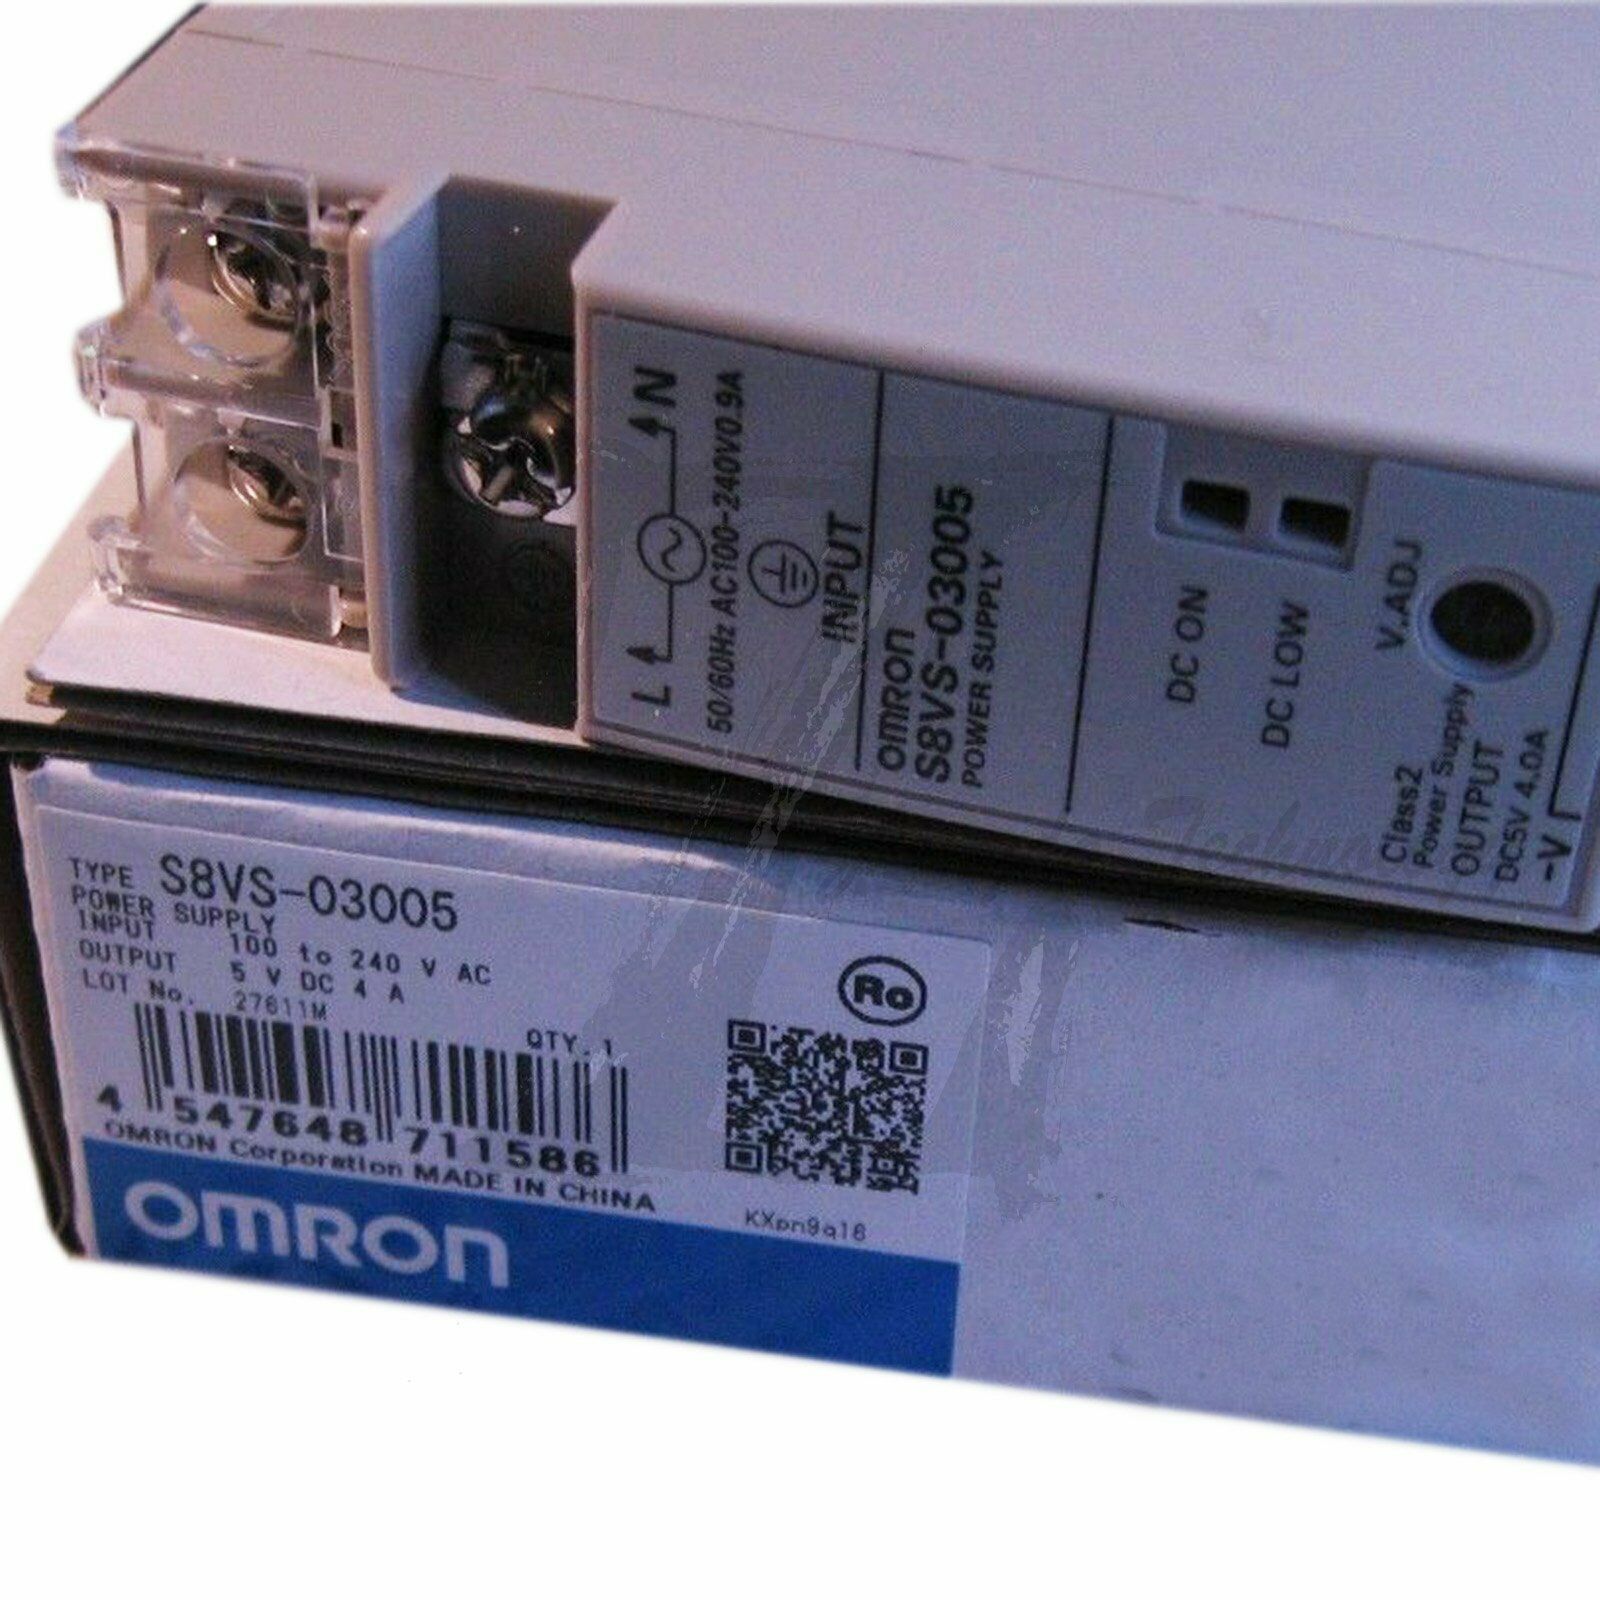 1Pc new Omron switching power supply S8VS-03005 one year warranty KOEED 101-200, 90%, import_2020_10_10_031751, Omron, Other